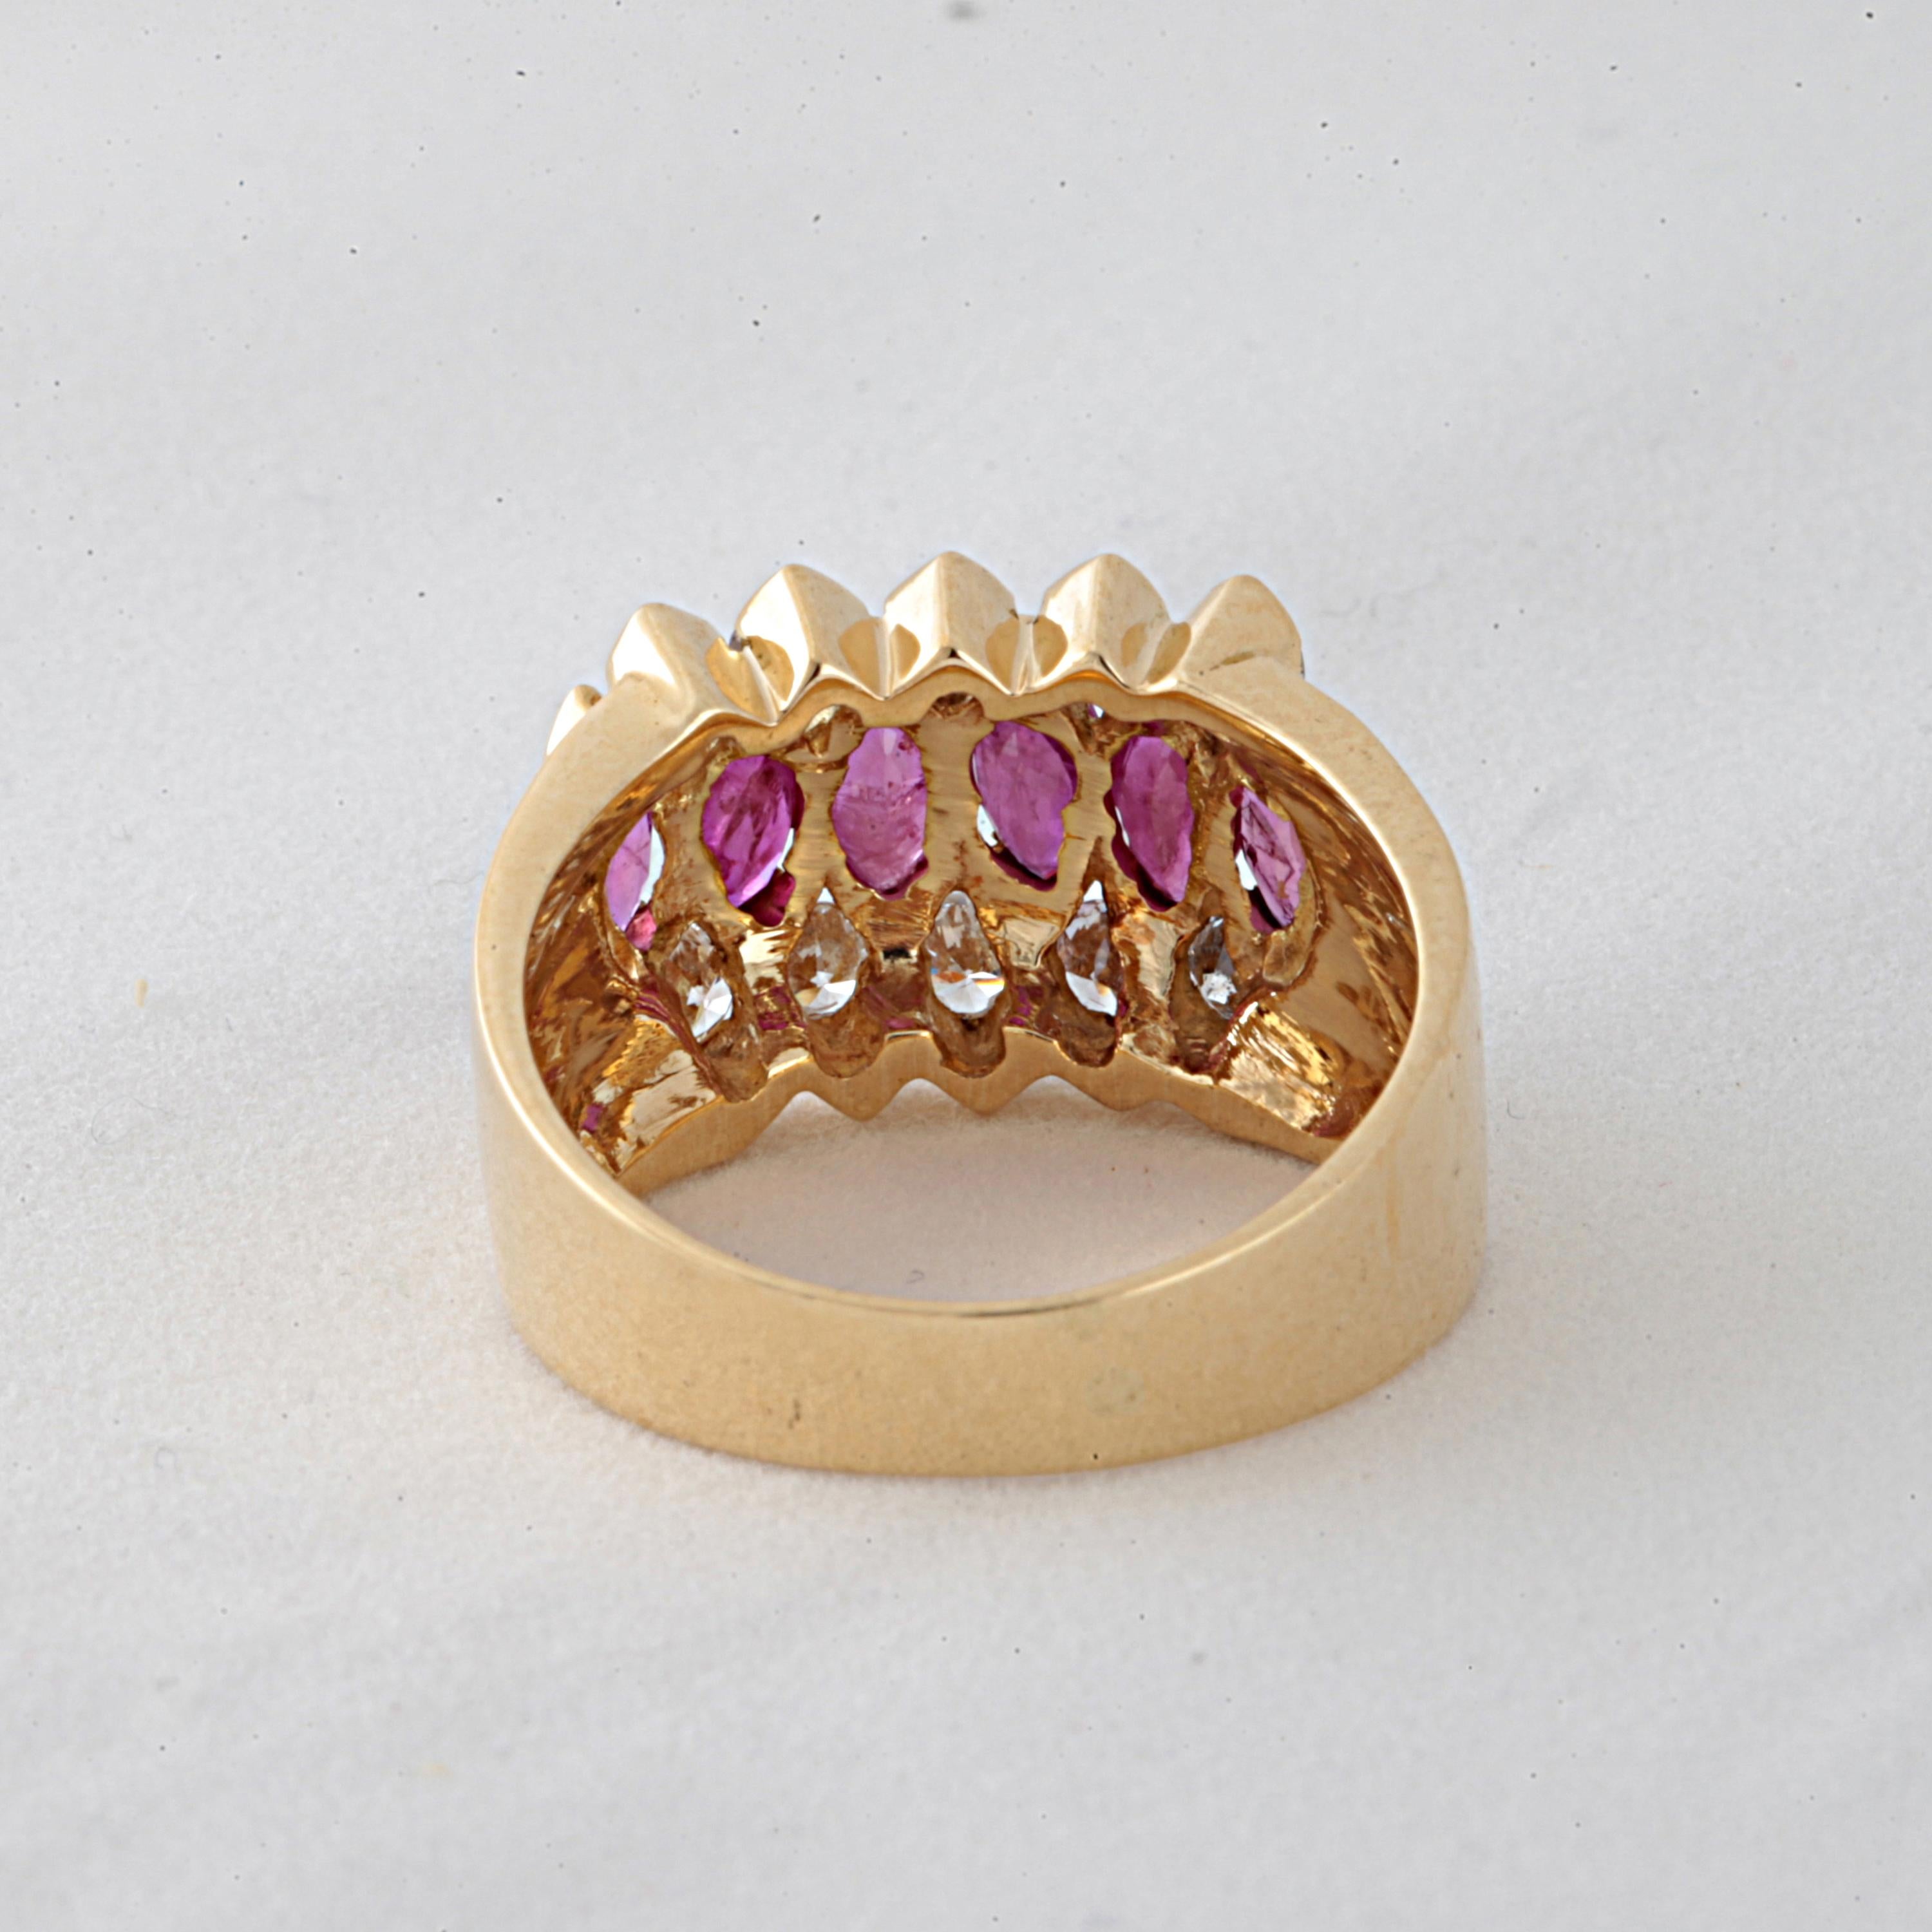 18 Kt Yellow Gold Band Ring with 6 Navette Rubies and 10 Round Brilliant Diamonds
The 6 Rubies are Marquise cut, trasparent, omogeneous with very nice matching colour, purplish red with an estimated unit weight of: 0. 35cts ( except 1 smaller